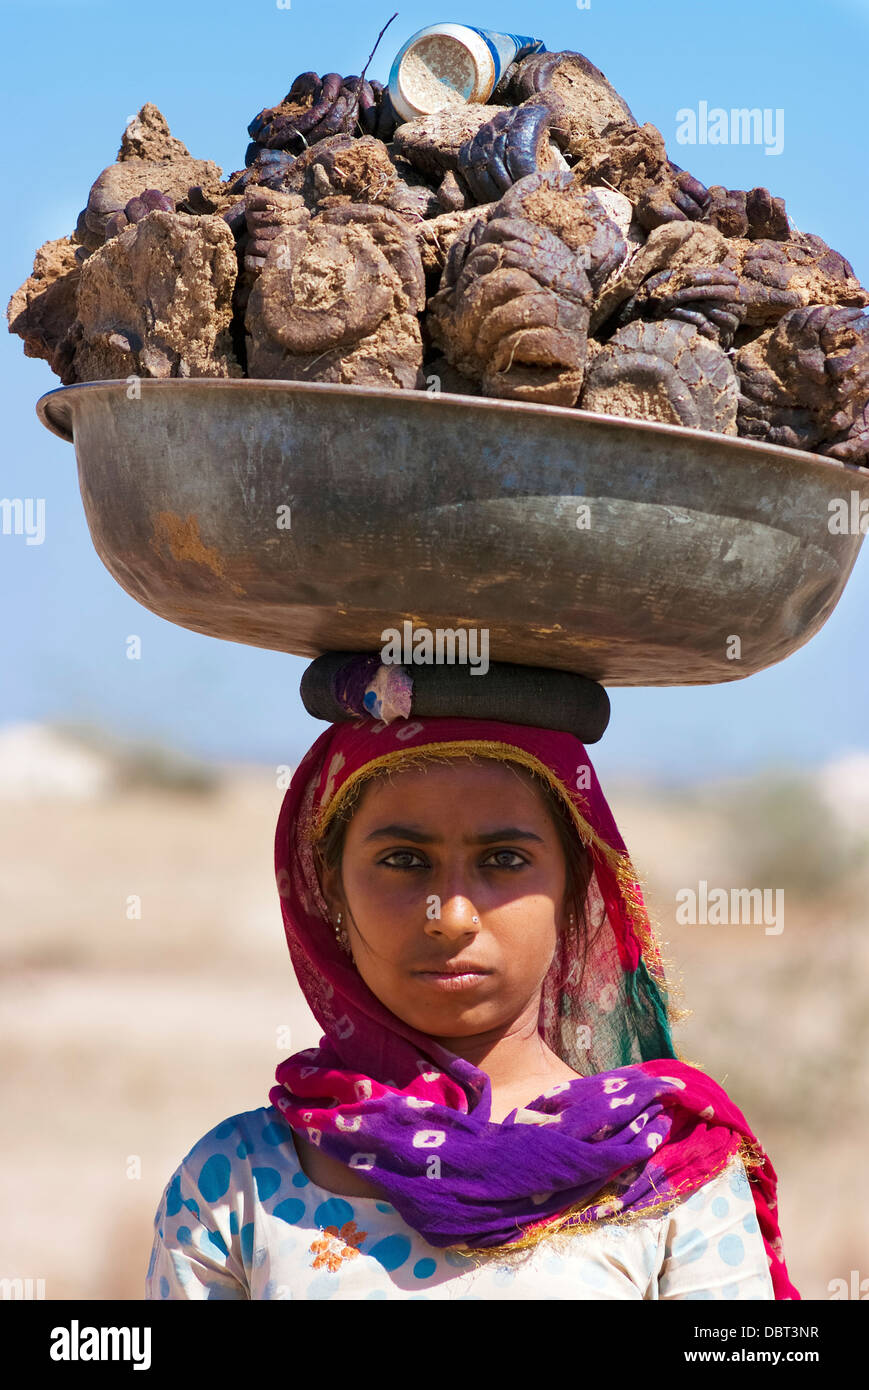 A woman carries a basin full of cow dung on their head on February 27, 2013 in Rajasthan, India. Stock Photo